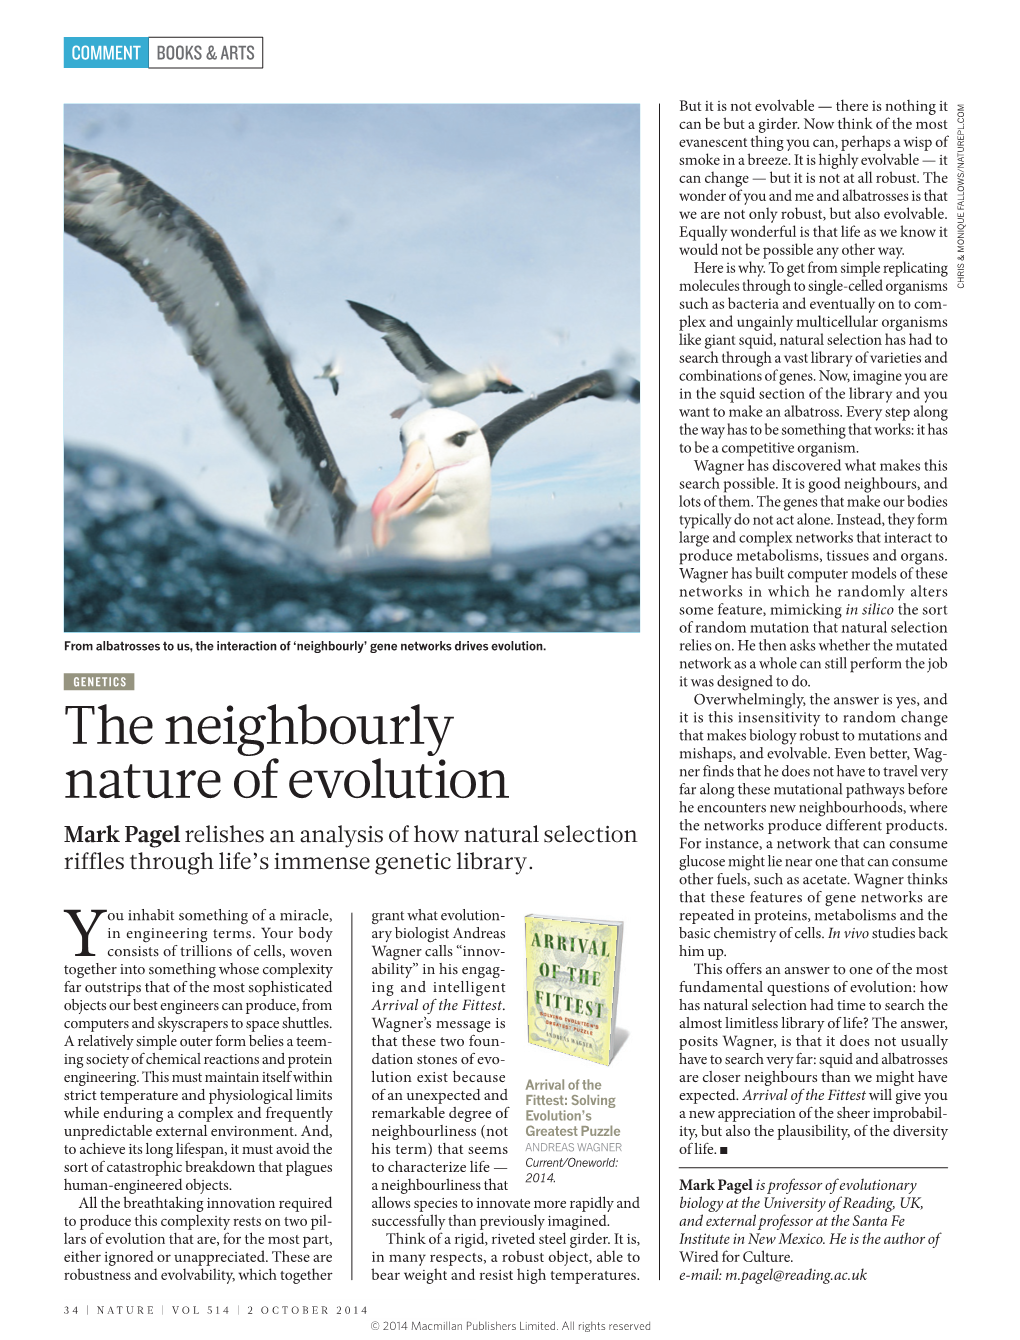 The Neighbourly Nature of Evolution